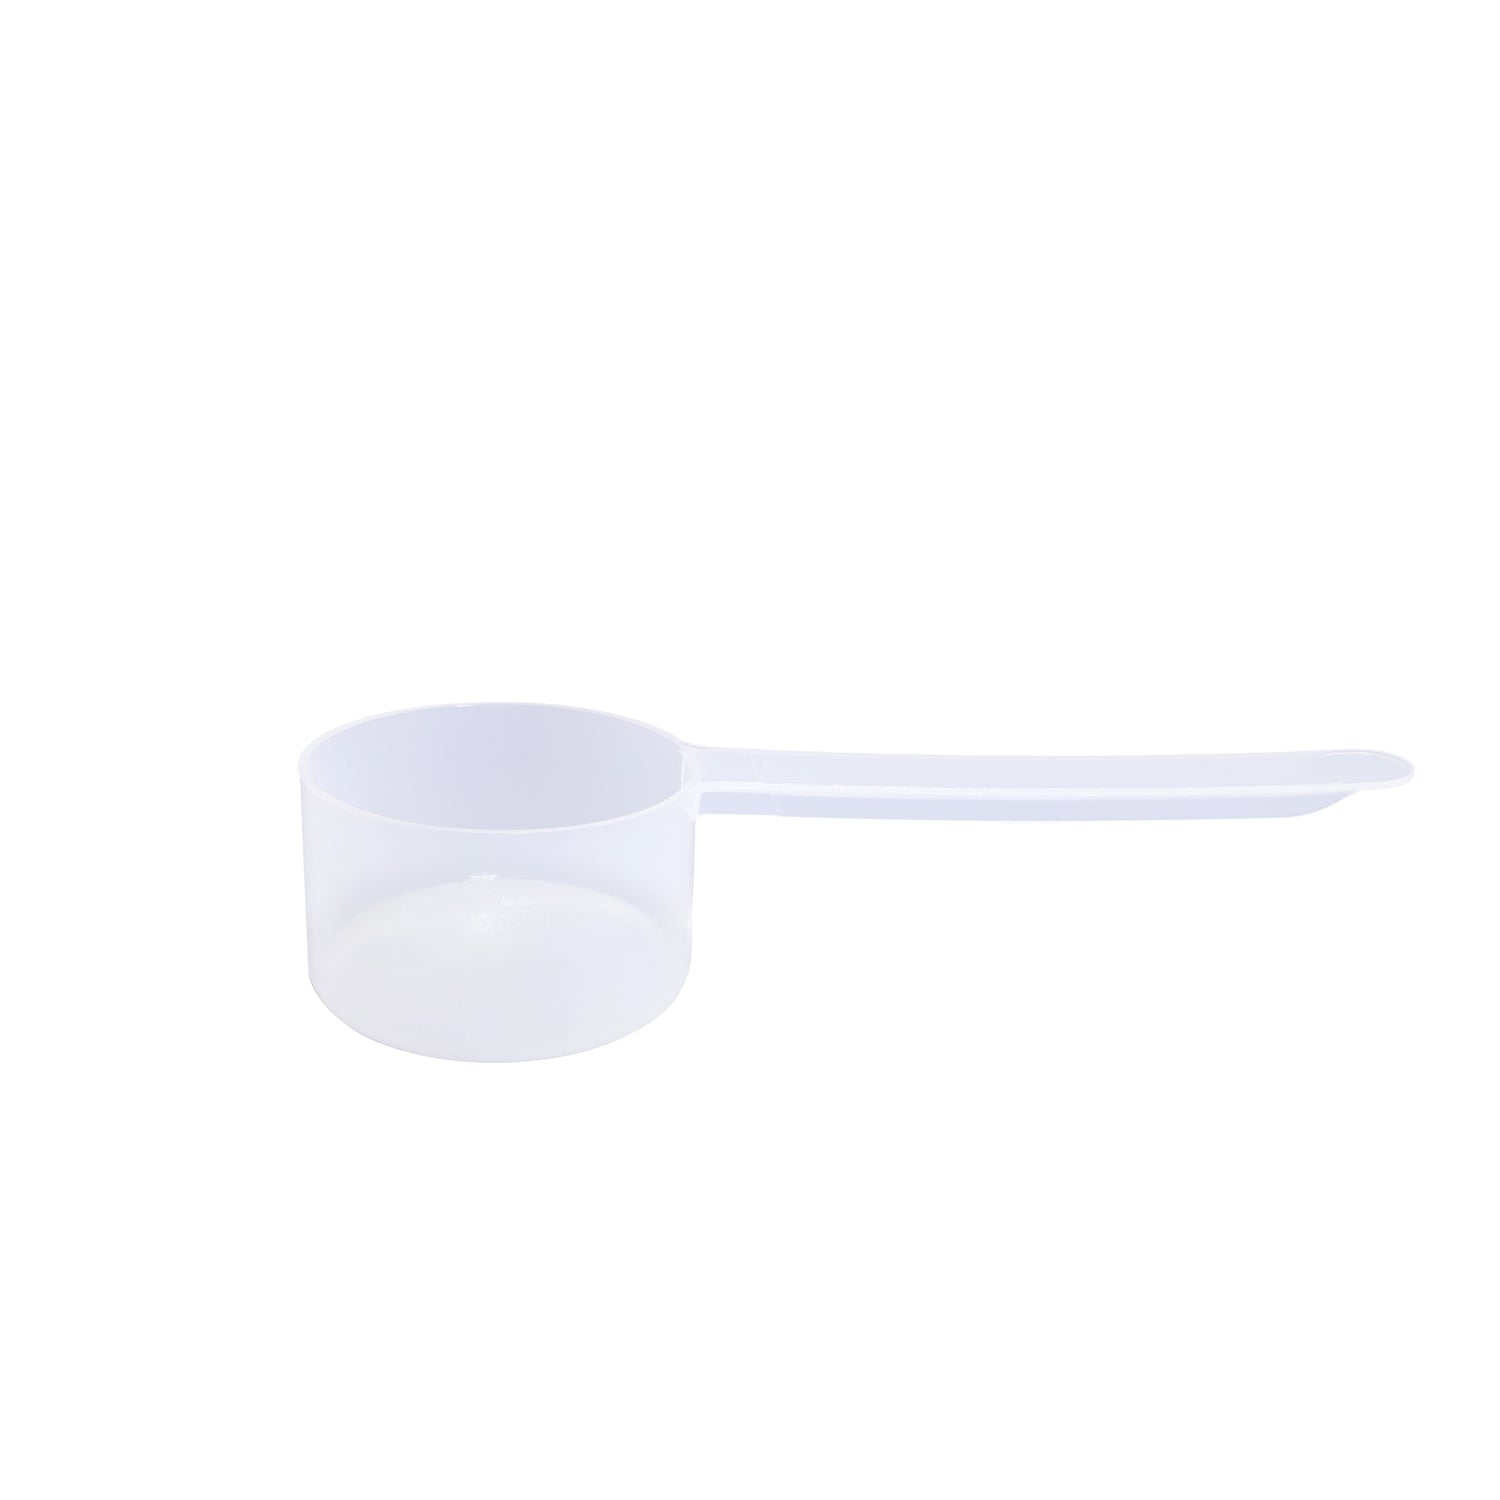 3 Tablespoon (1.5 Oz.  43 mL) Long Handle Scoop for Measuring Coffee, Pet  Food, Grains, Protein, Spices and Other Dry Goods BPA Free $11.99